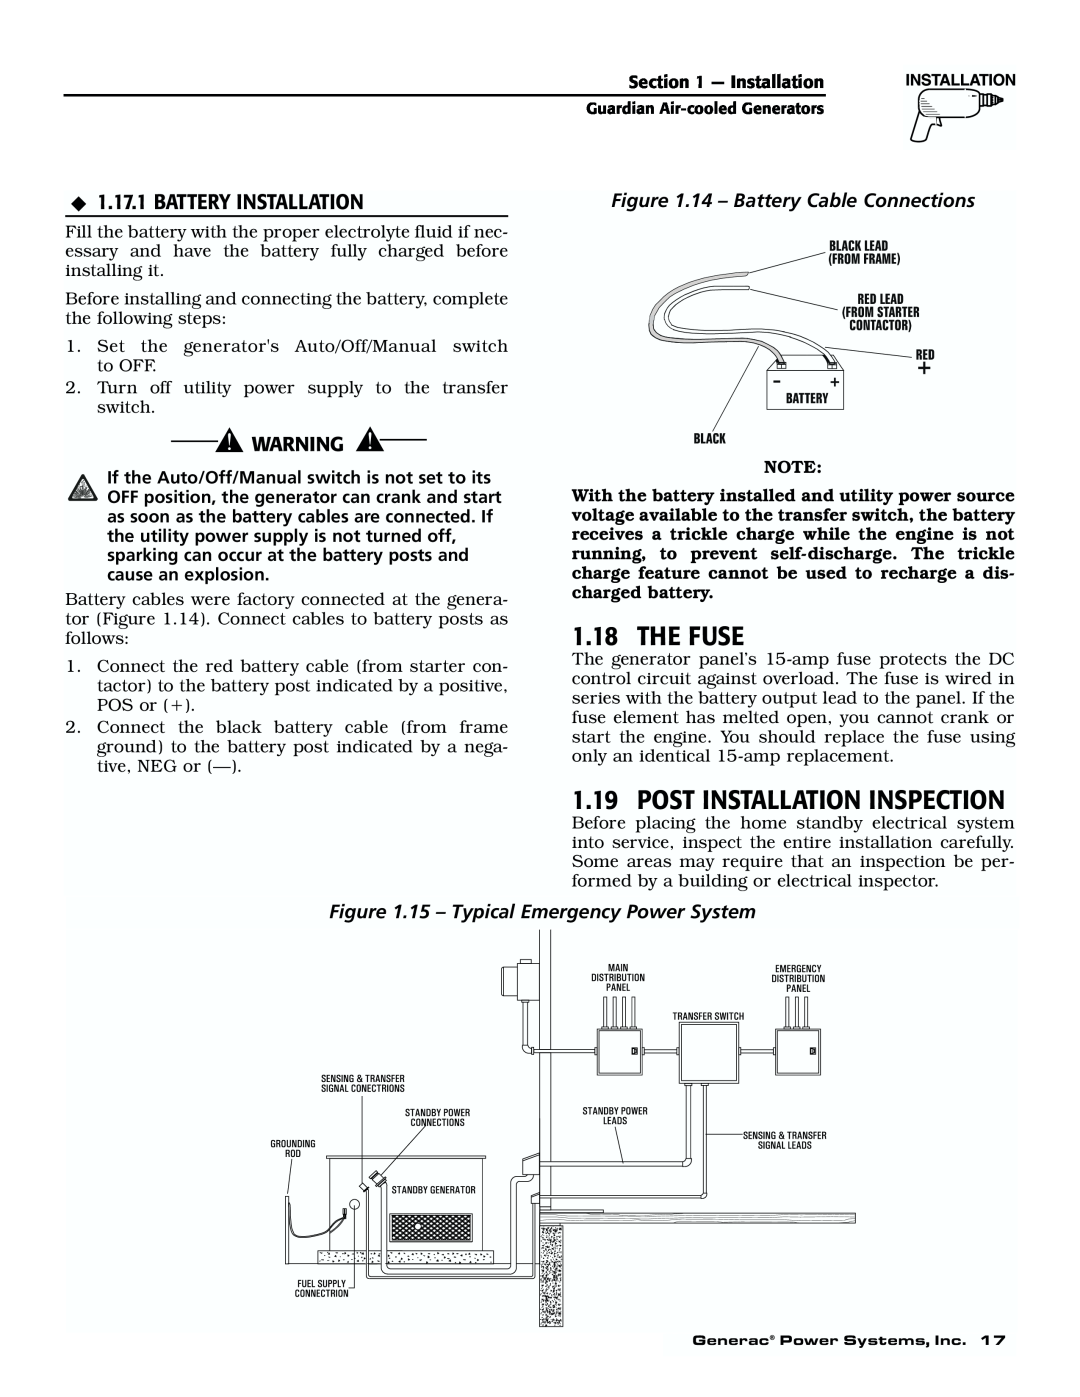 Generac 04077-1, 04109-1, 04079-1, 00789-1, 00844-1 manual The Fuse, Post Installation Inspection, Battery Installation 